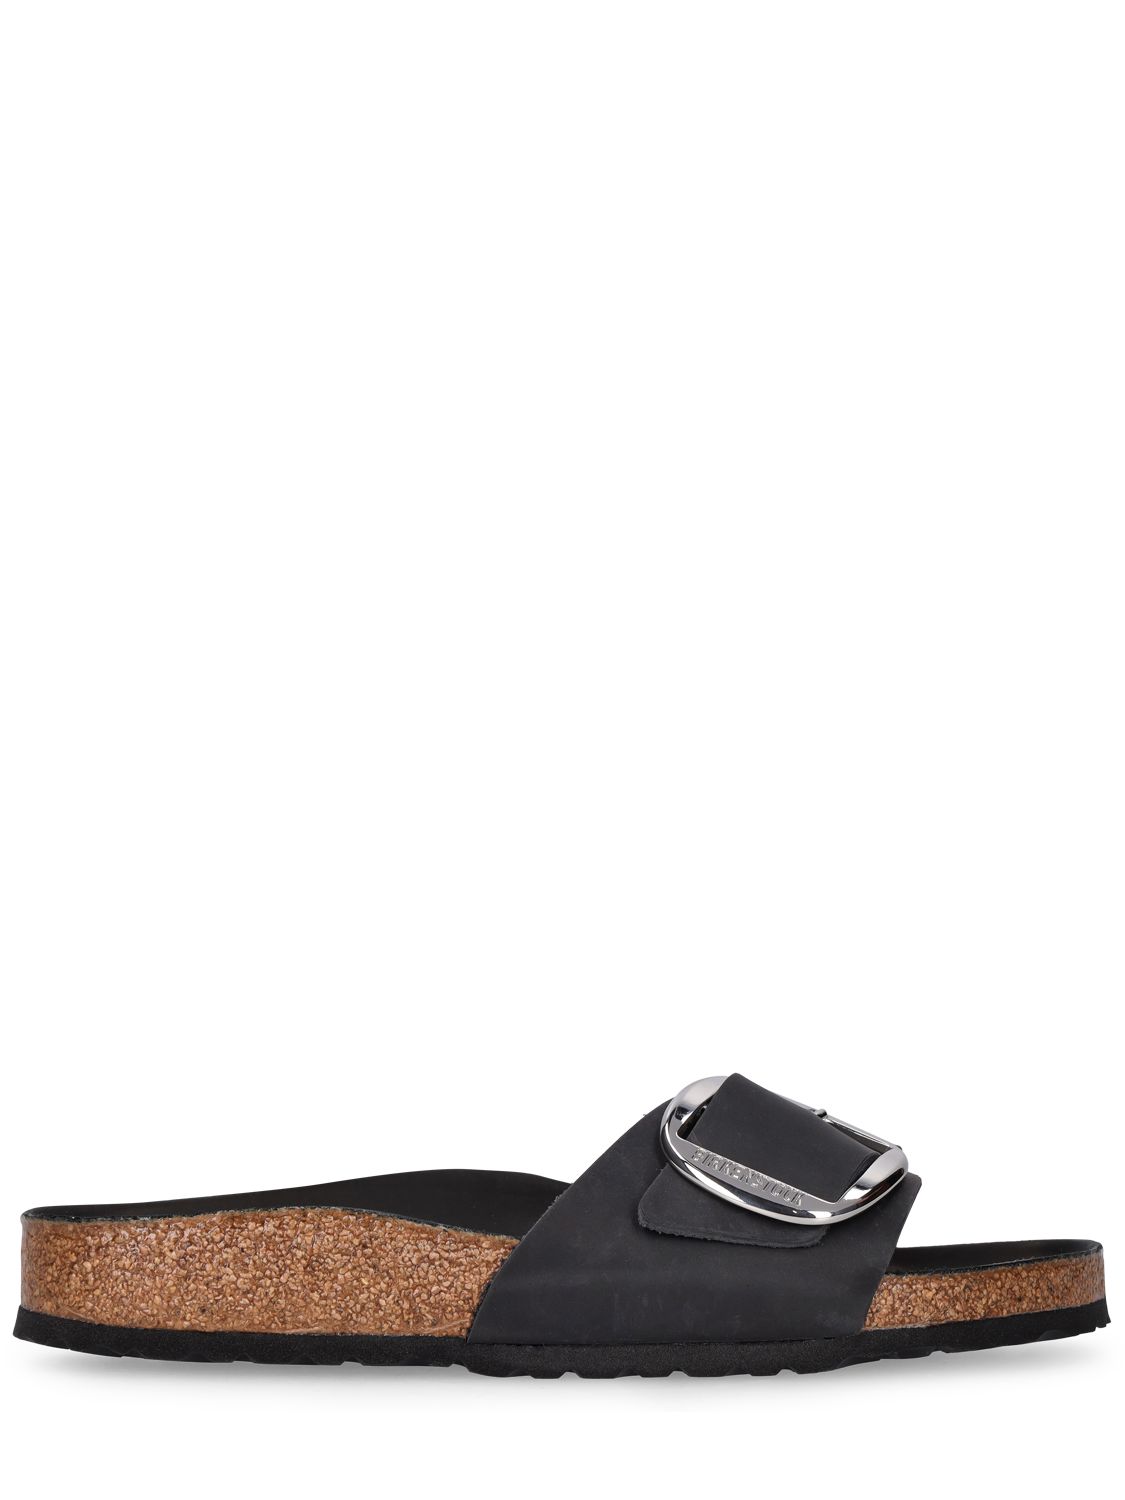 Madrid Big Buckle Oiled Leather Sandals